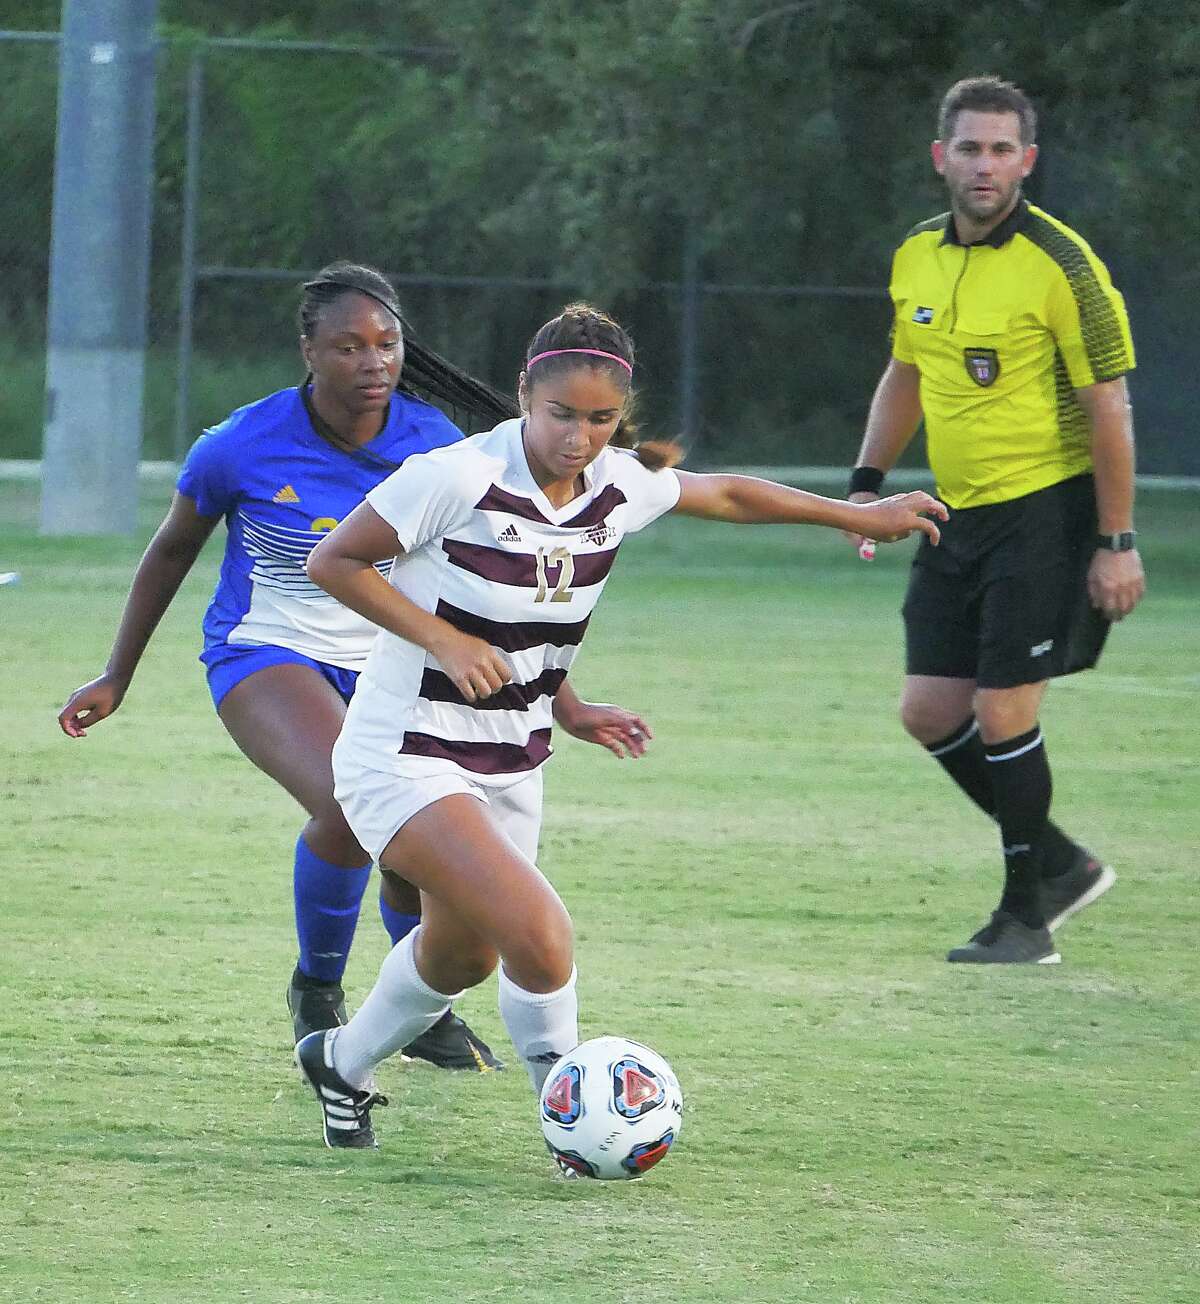 Vivian Martinez and TAMIU open conference play Thursday with a 4:30 p.m. game at St. Edward’s. Martinez leads TAMIU with five points in four games.